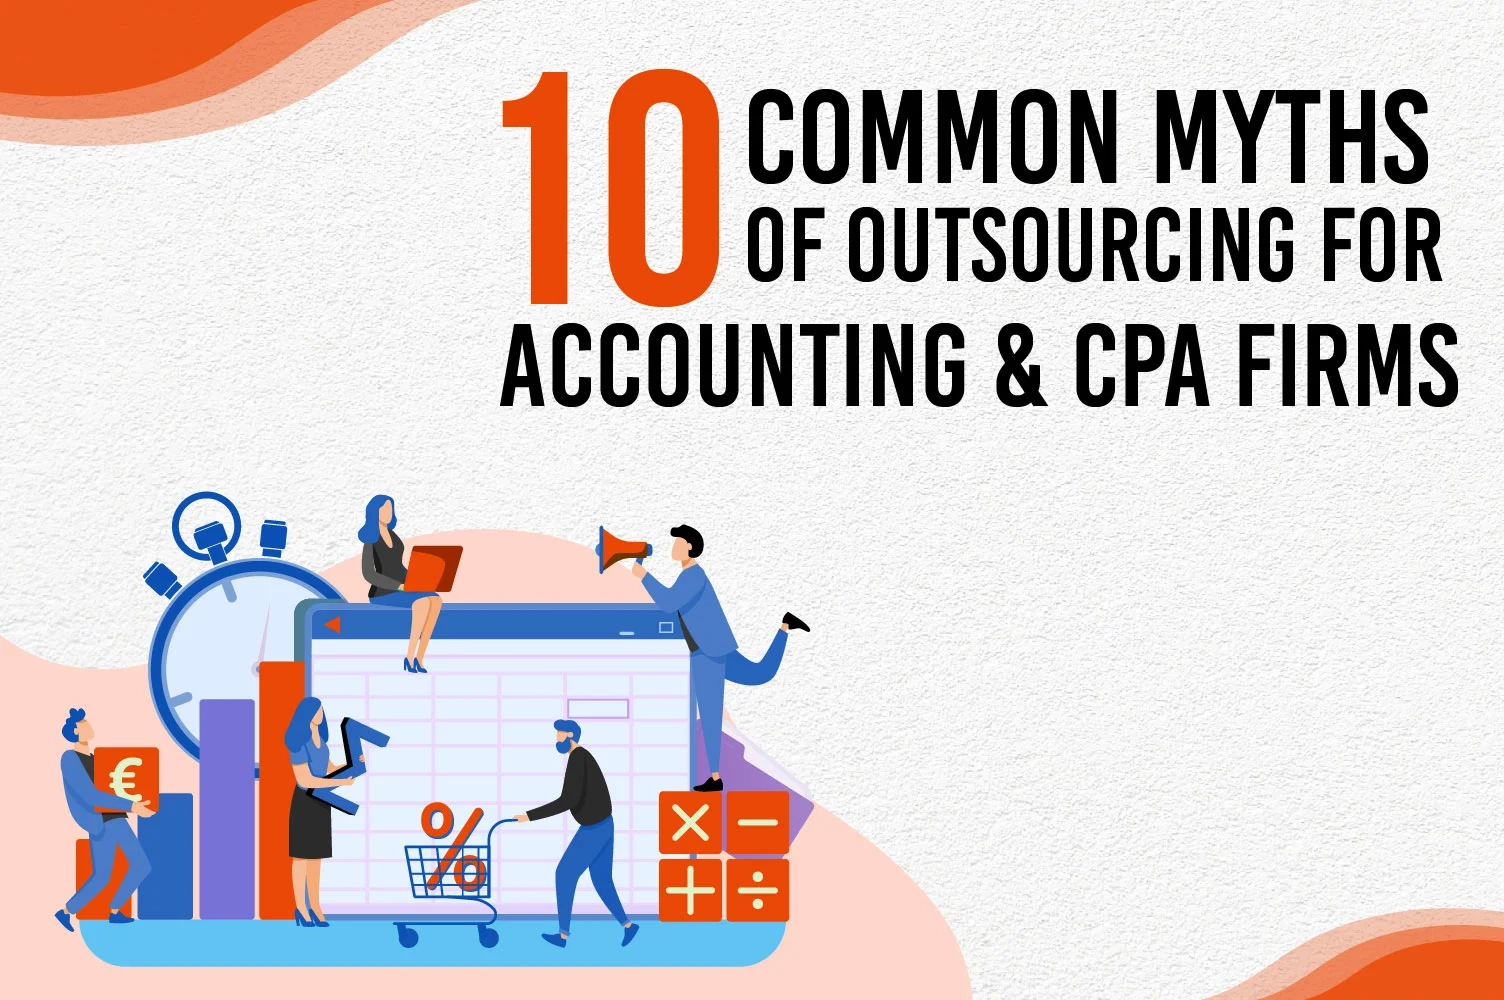 10 Common Myths of Outsourcing for Accounting & CPA Firms